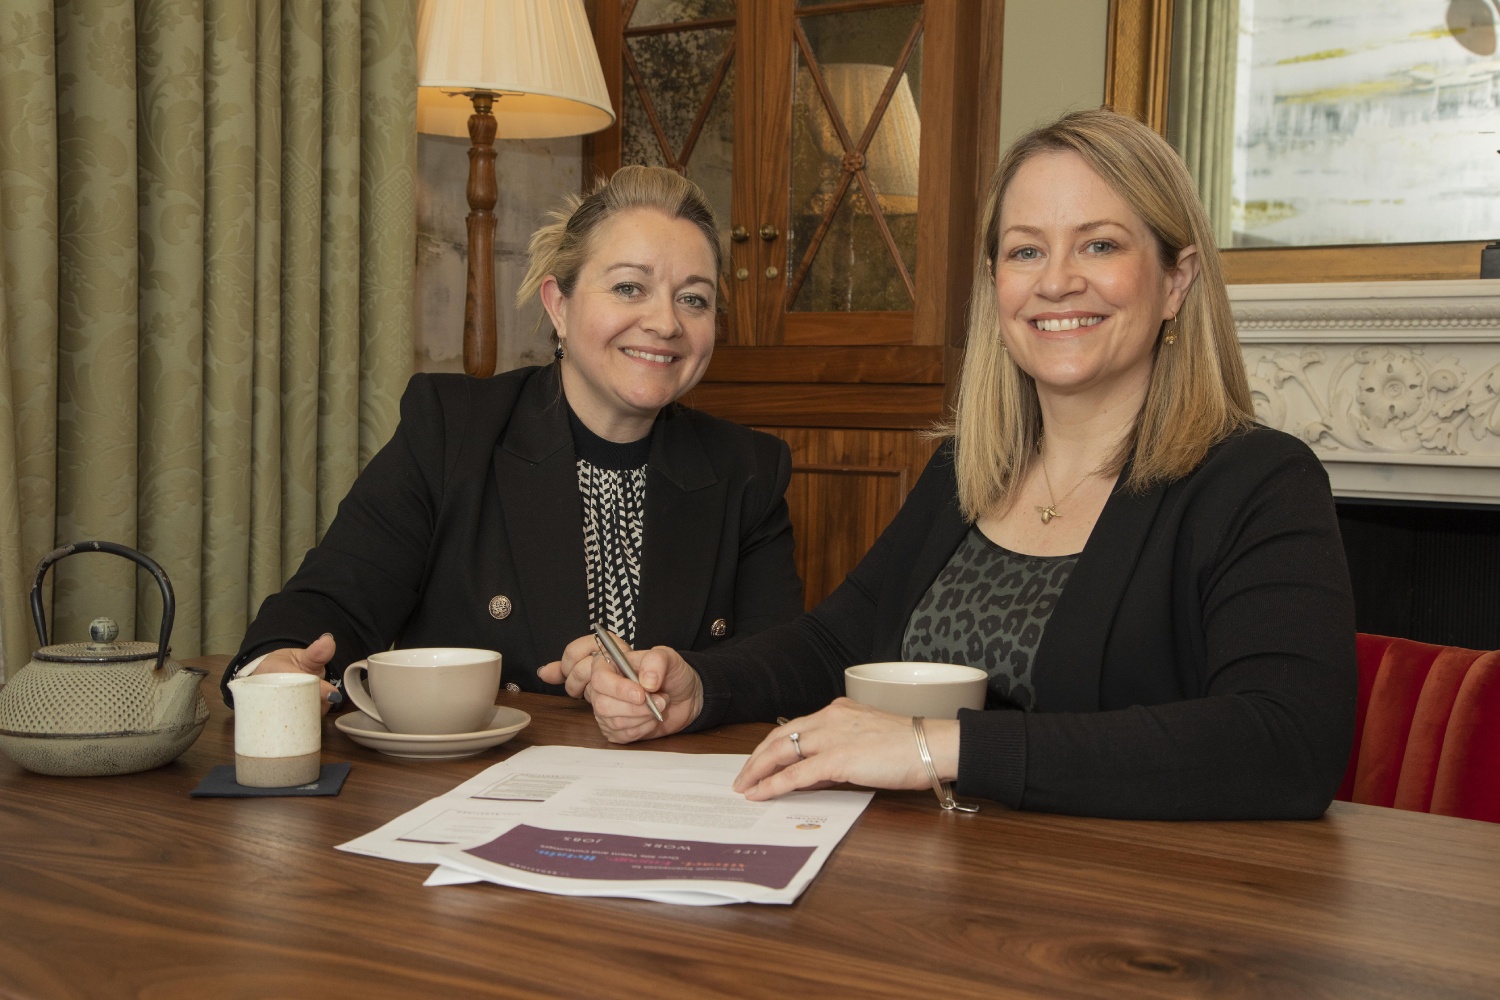 From left, Lyndsey Simpson FounderCEO at 55Redefined Group and Louise Batchelor, HR Director, Bank of Ireland